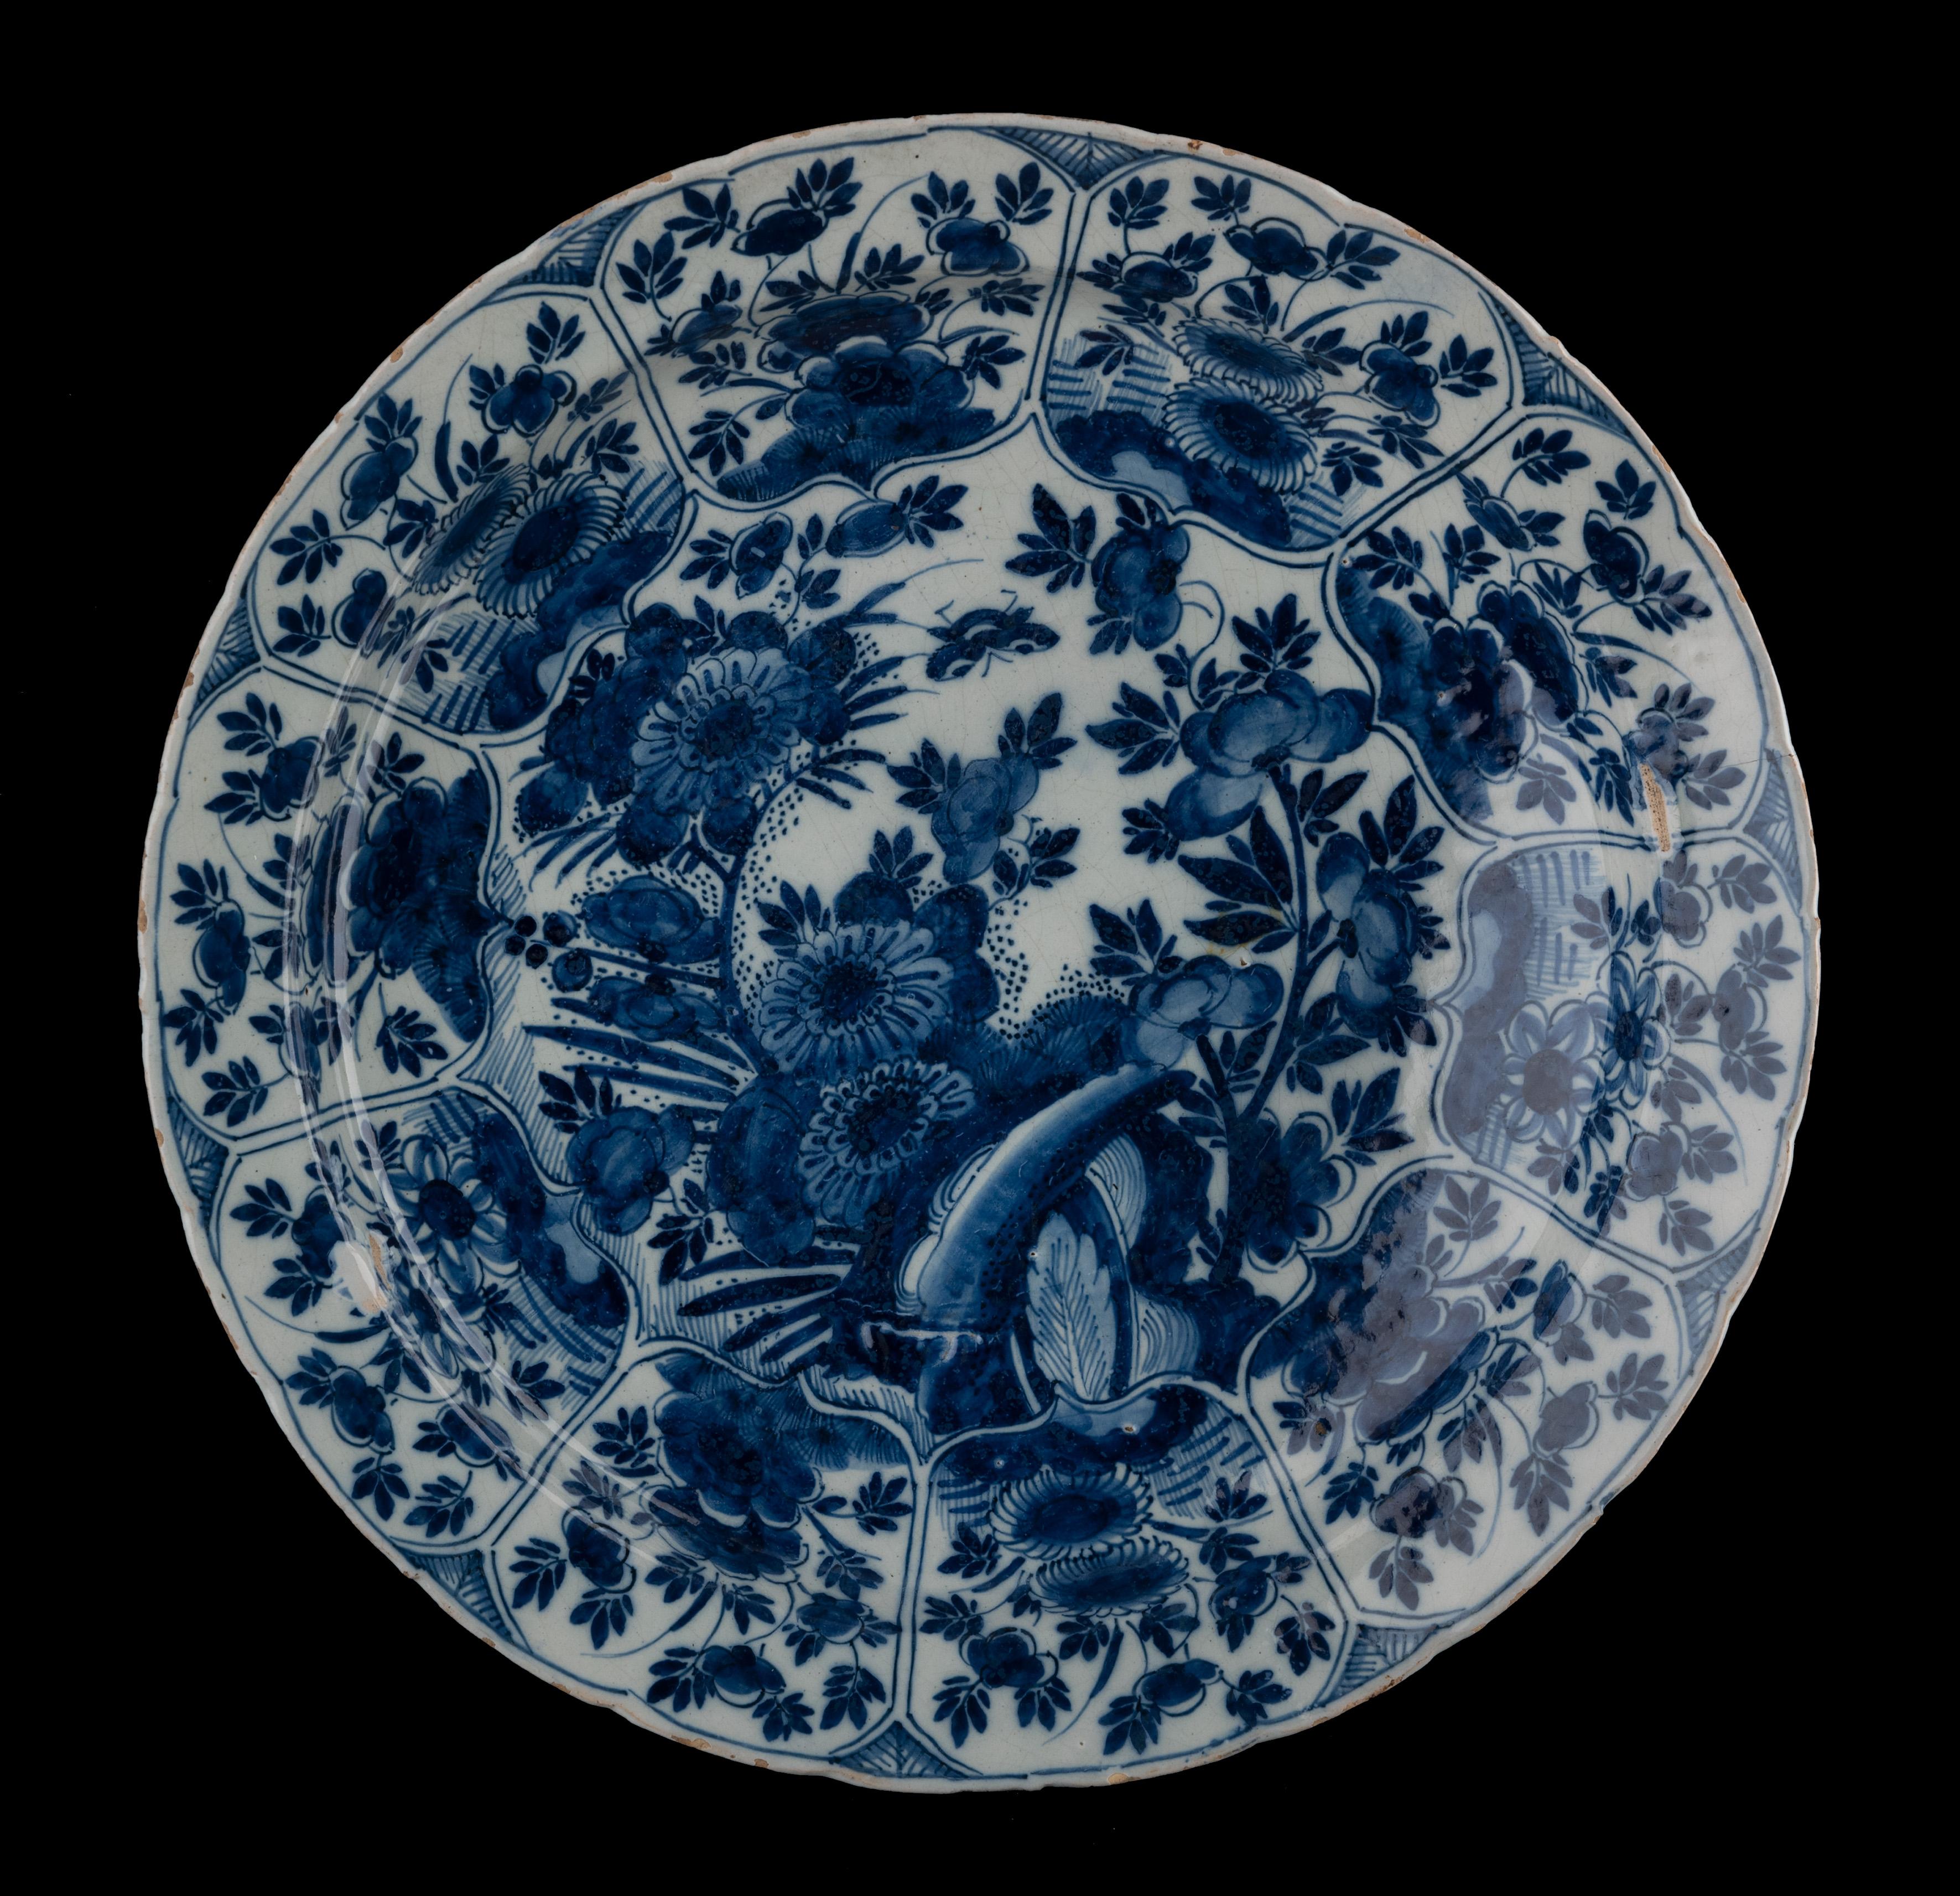 Blue and white chinoiserie dish Delft, 1691-1724
The Metal Pot pottery
Mark: LVE, period of Lambertus van Eenhoorn (1691-1724) 

The dish has a narrow, flat flange and is painted in blue with a floral chinoiserie decor of plants and flowers issuing